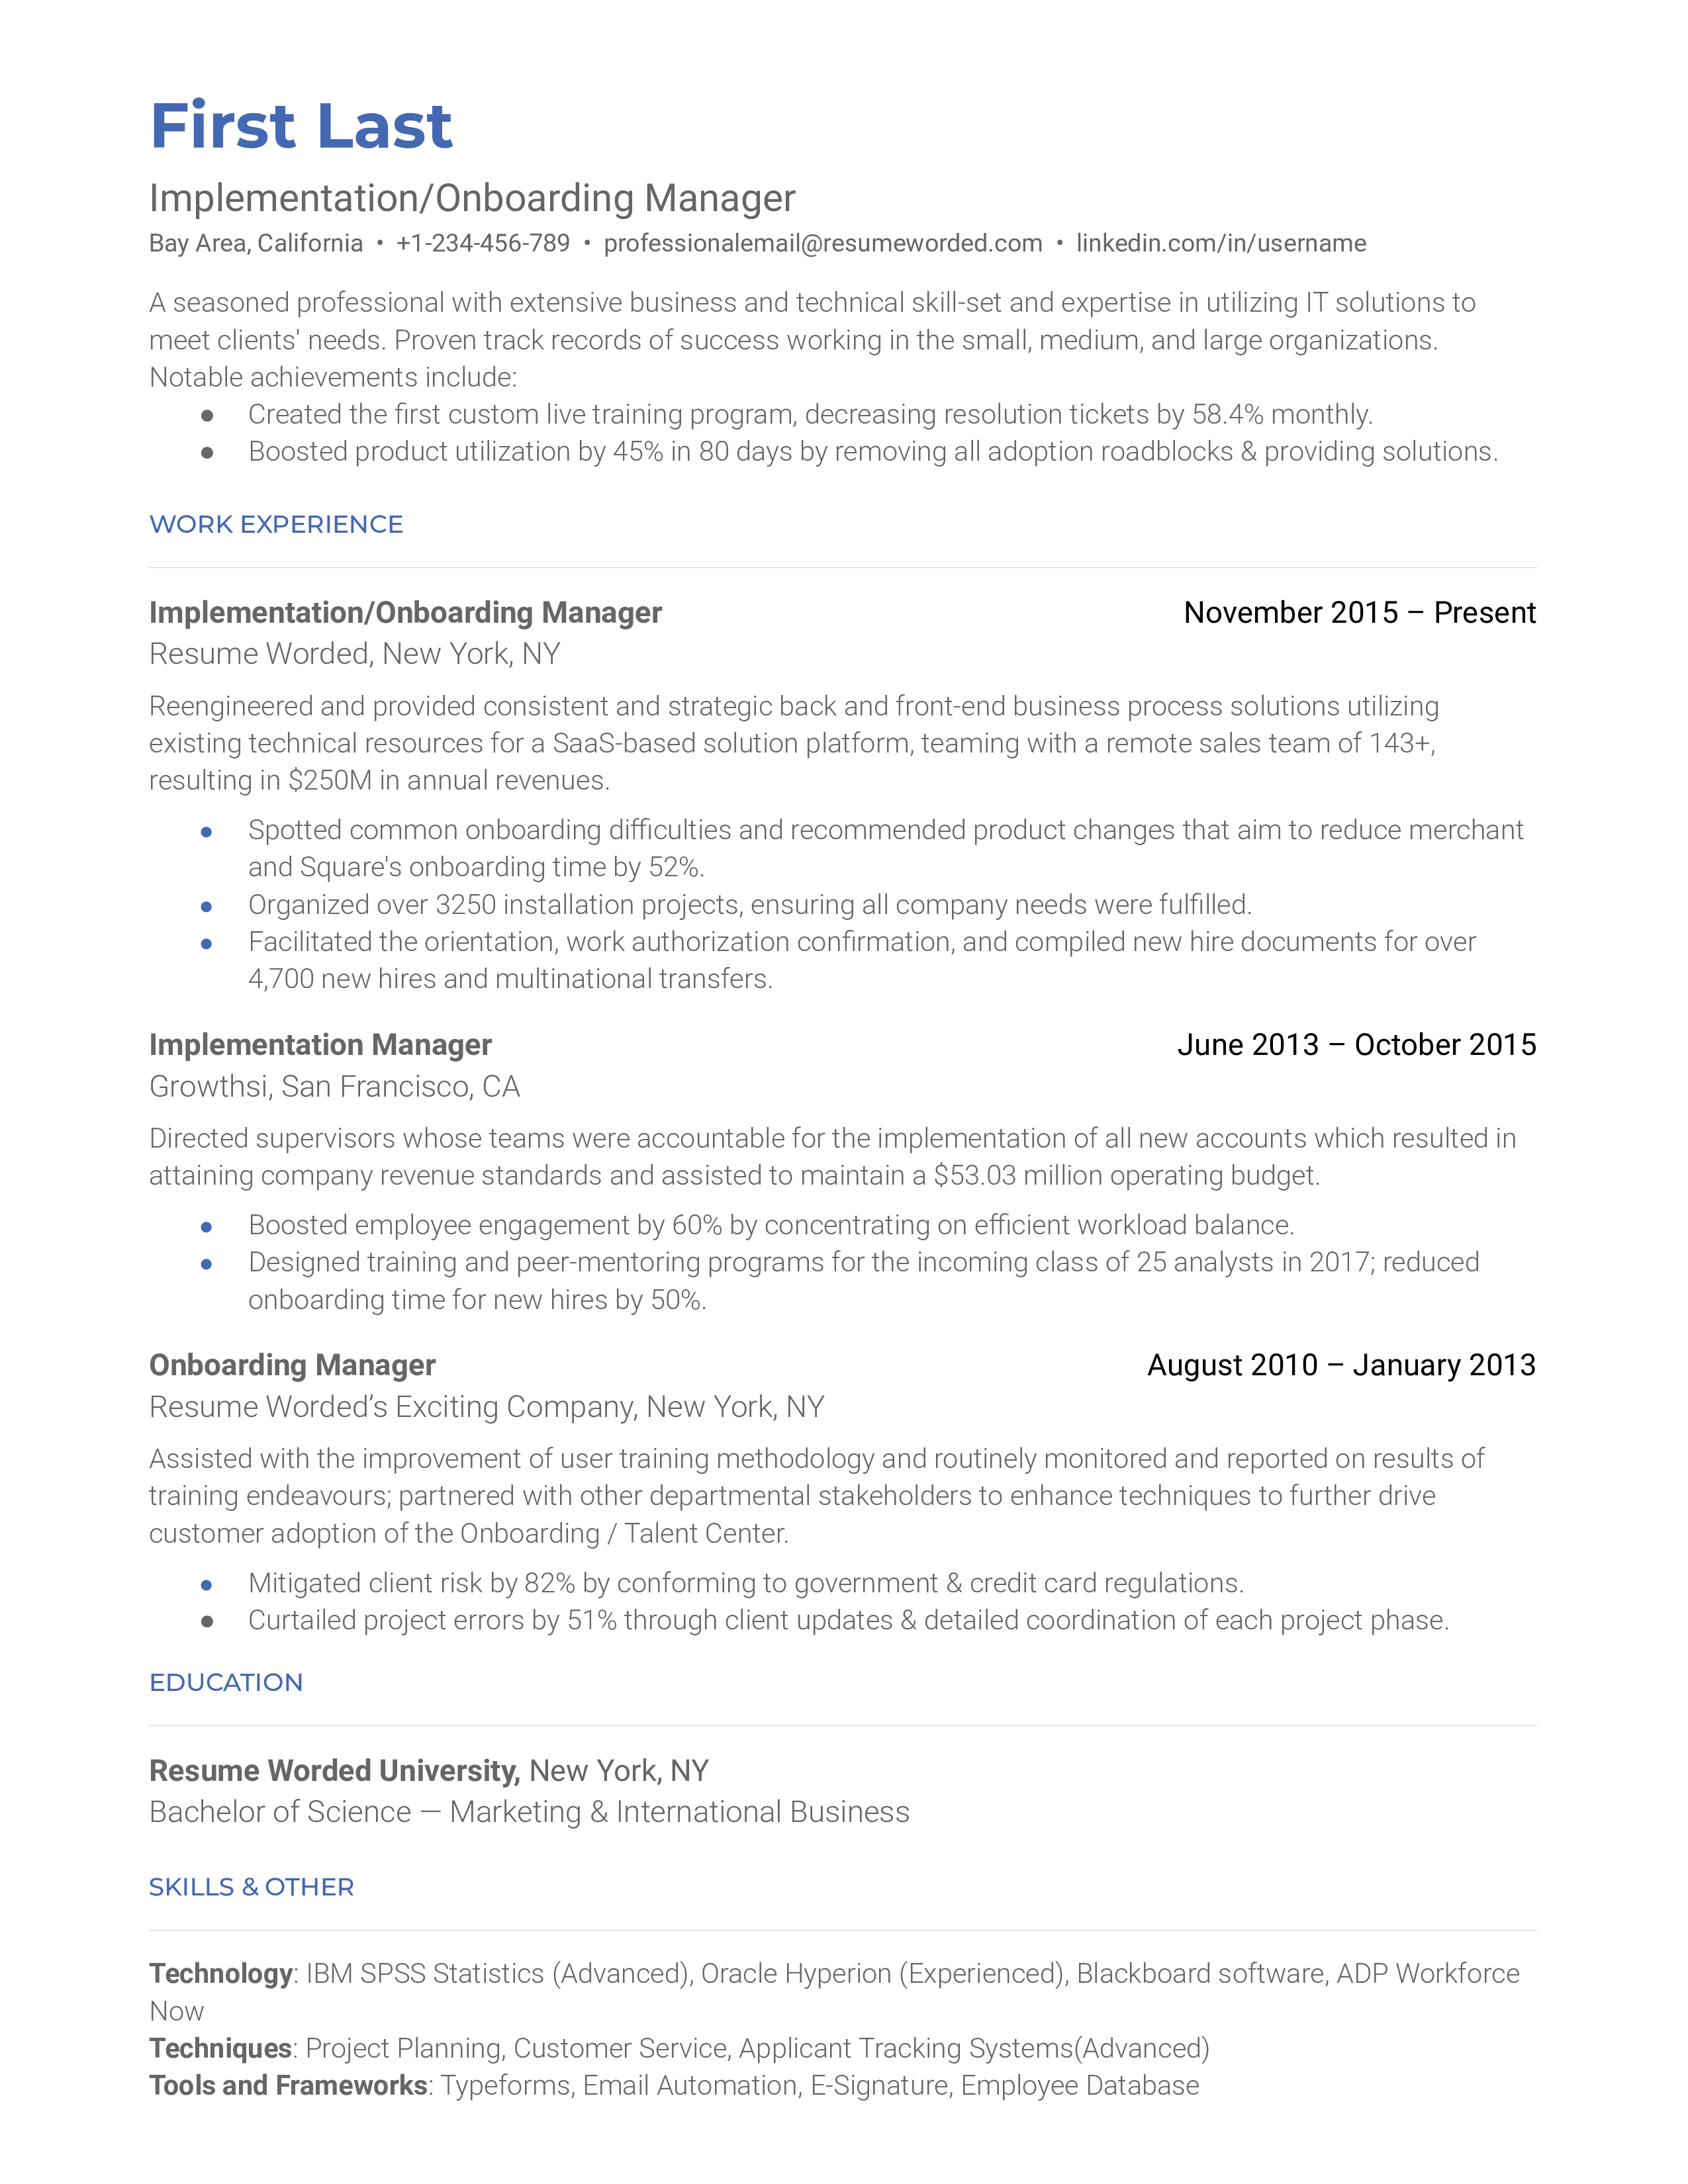 An Onboarding Manager resume template showcasing business experience and technical skill set.